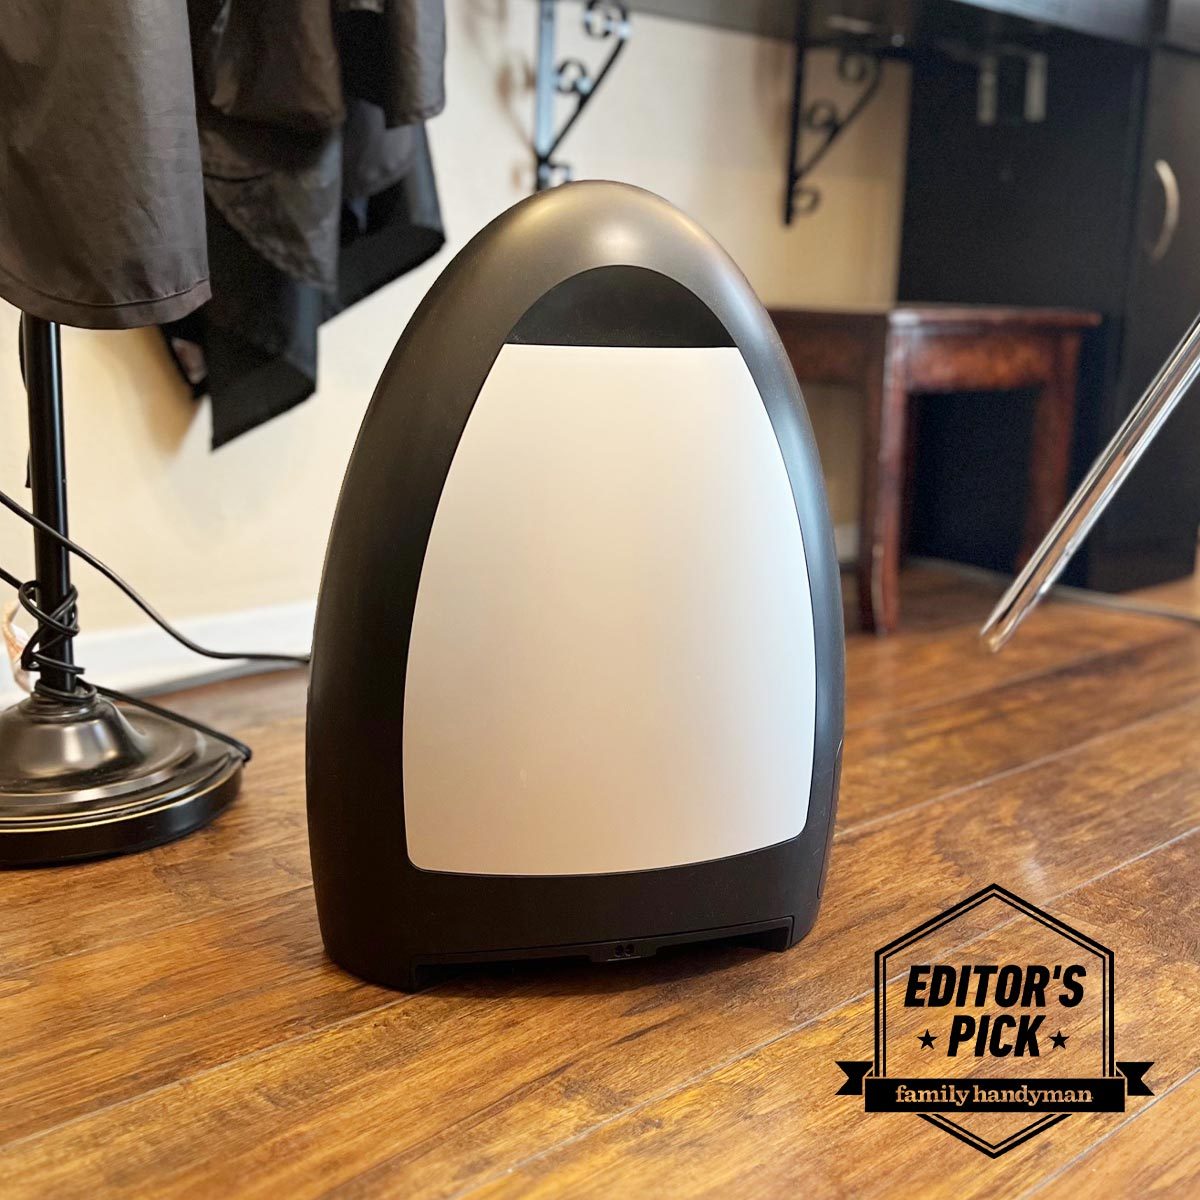 The EyeVac Home Vacuum Is Our Editor's Pick for Eliminating Pet Hair and Dirt From Floors